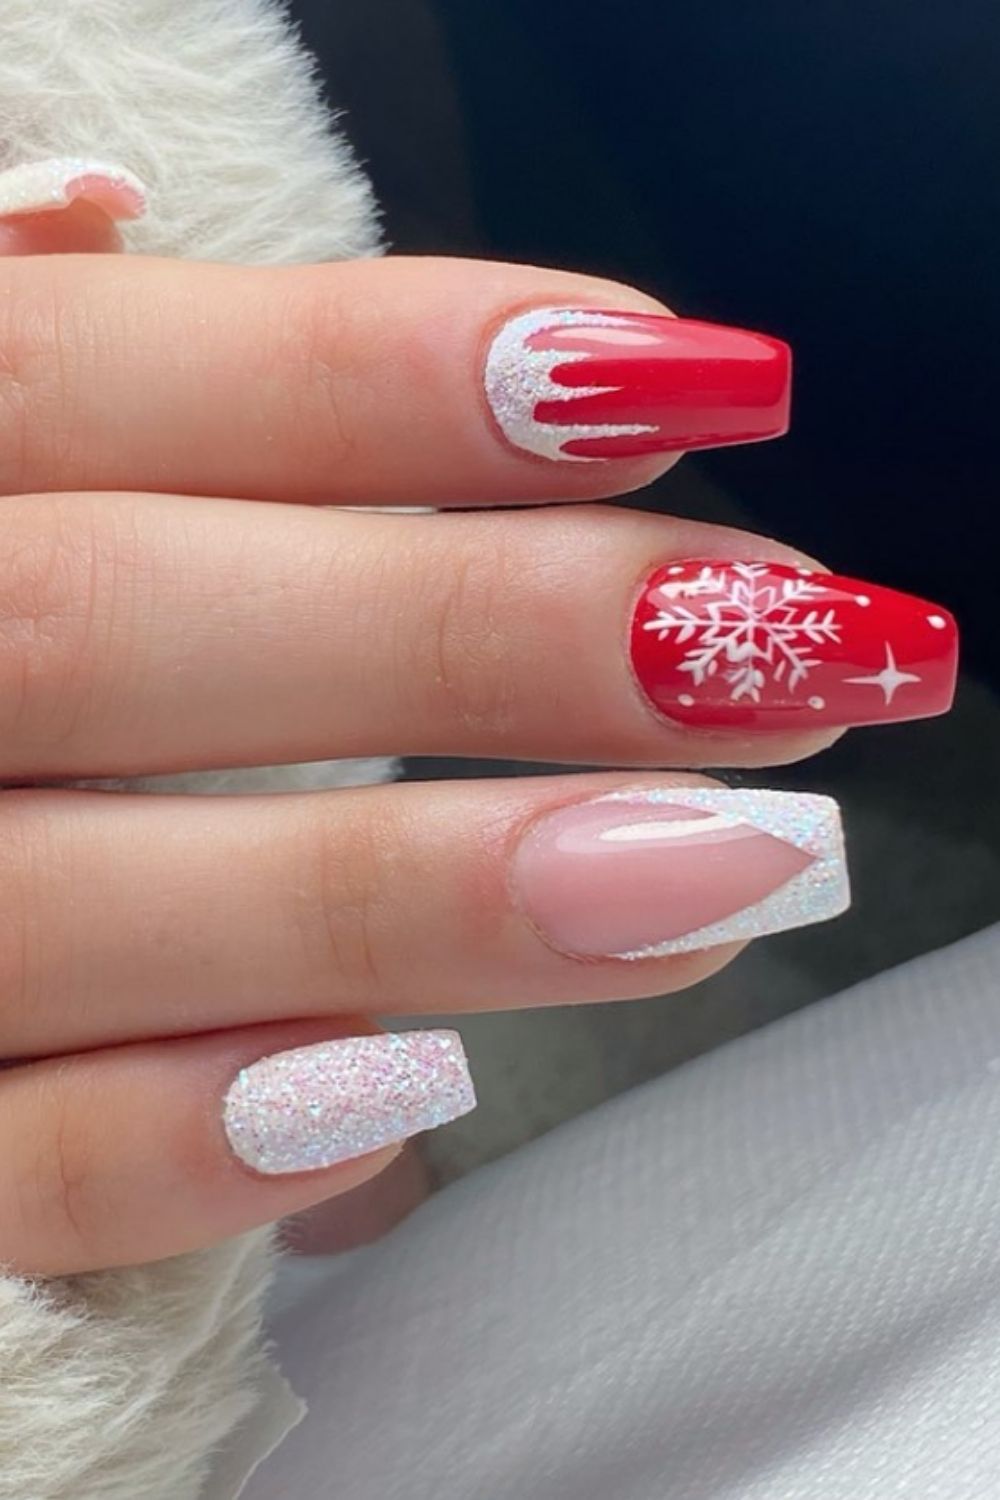 White and red coffin nails designs for snowflake